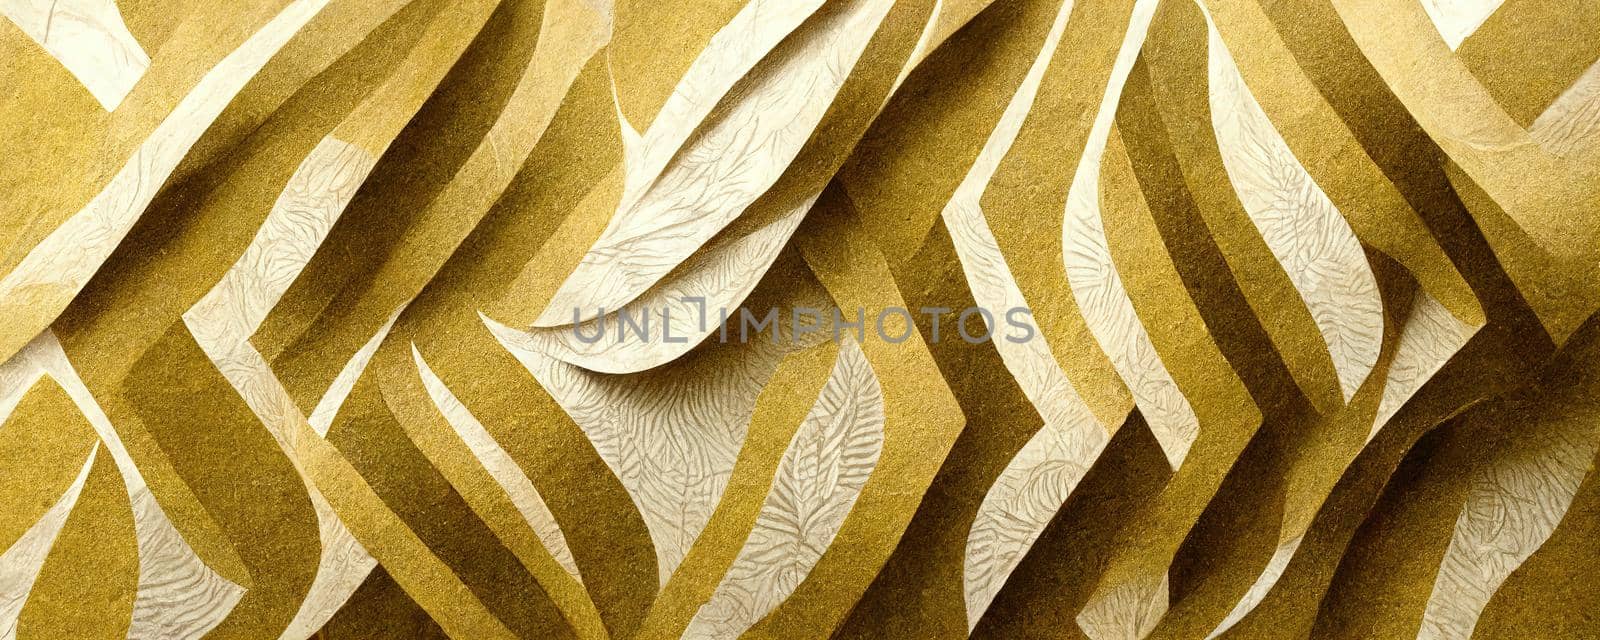 stylish background of golden and milky colors made in the style of cut paper.